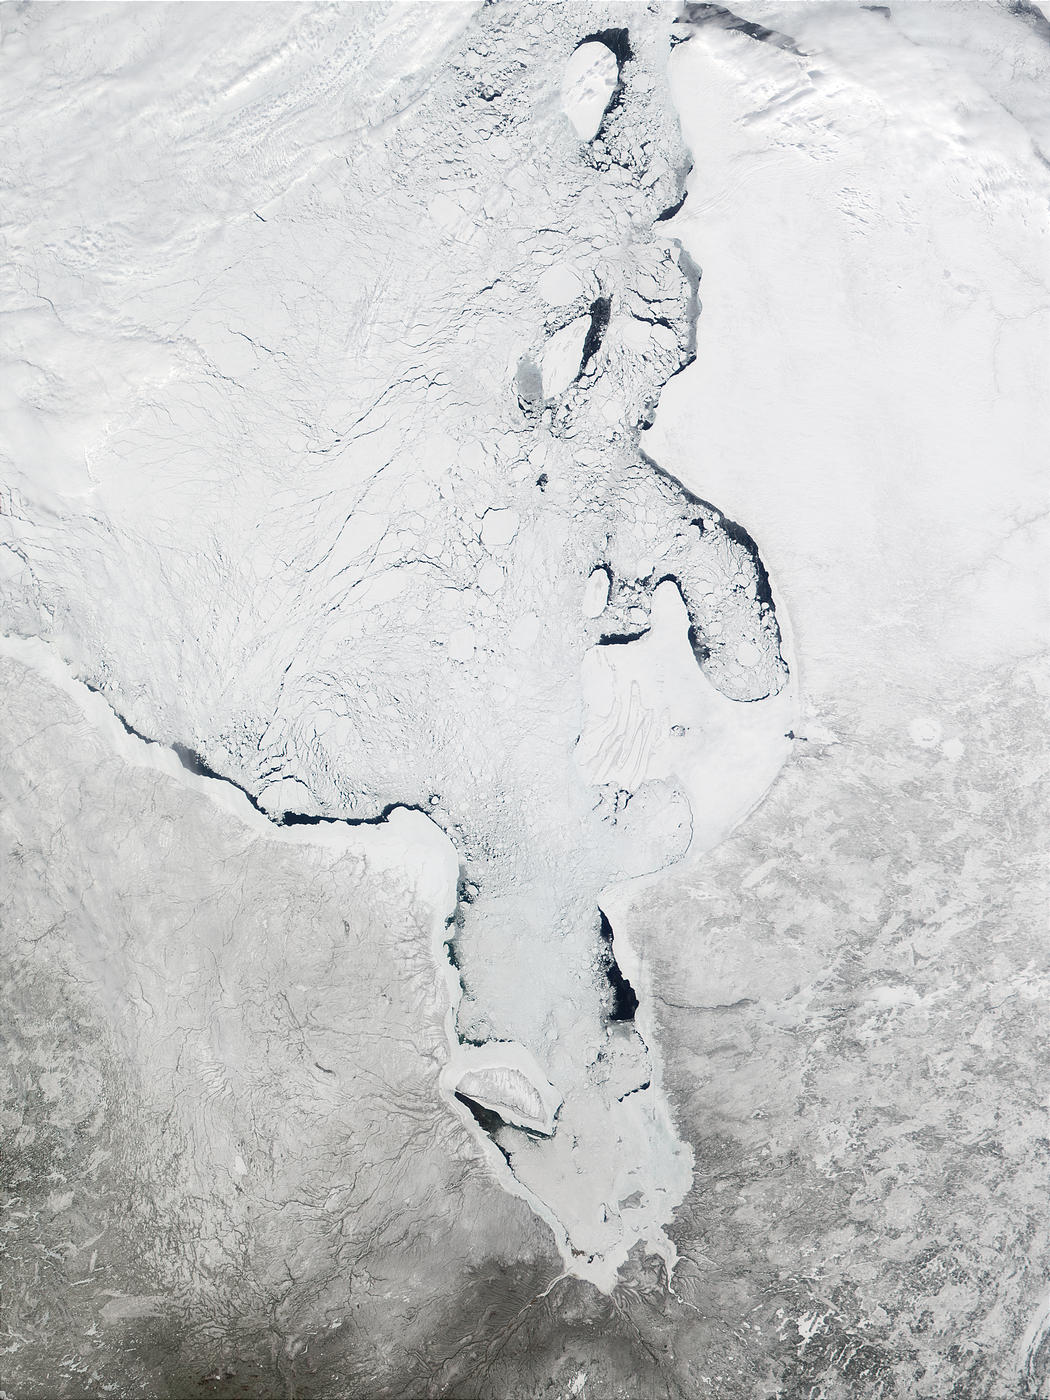 Hudson Bay and James Bay, Canada - related image preview